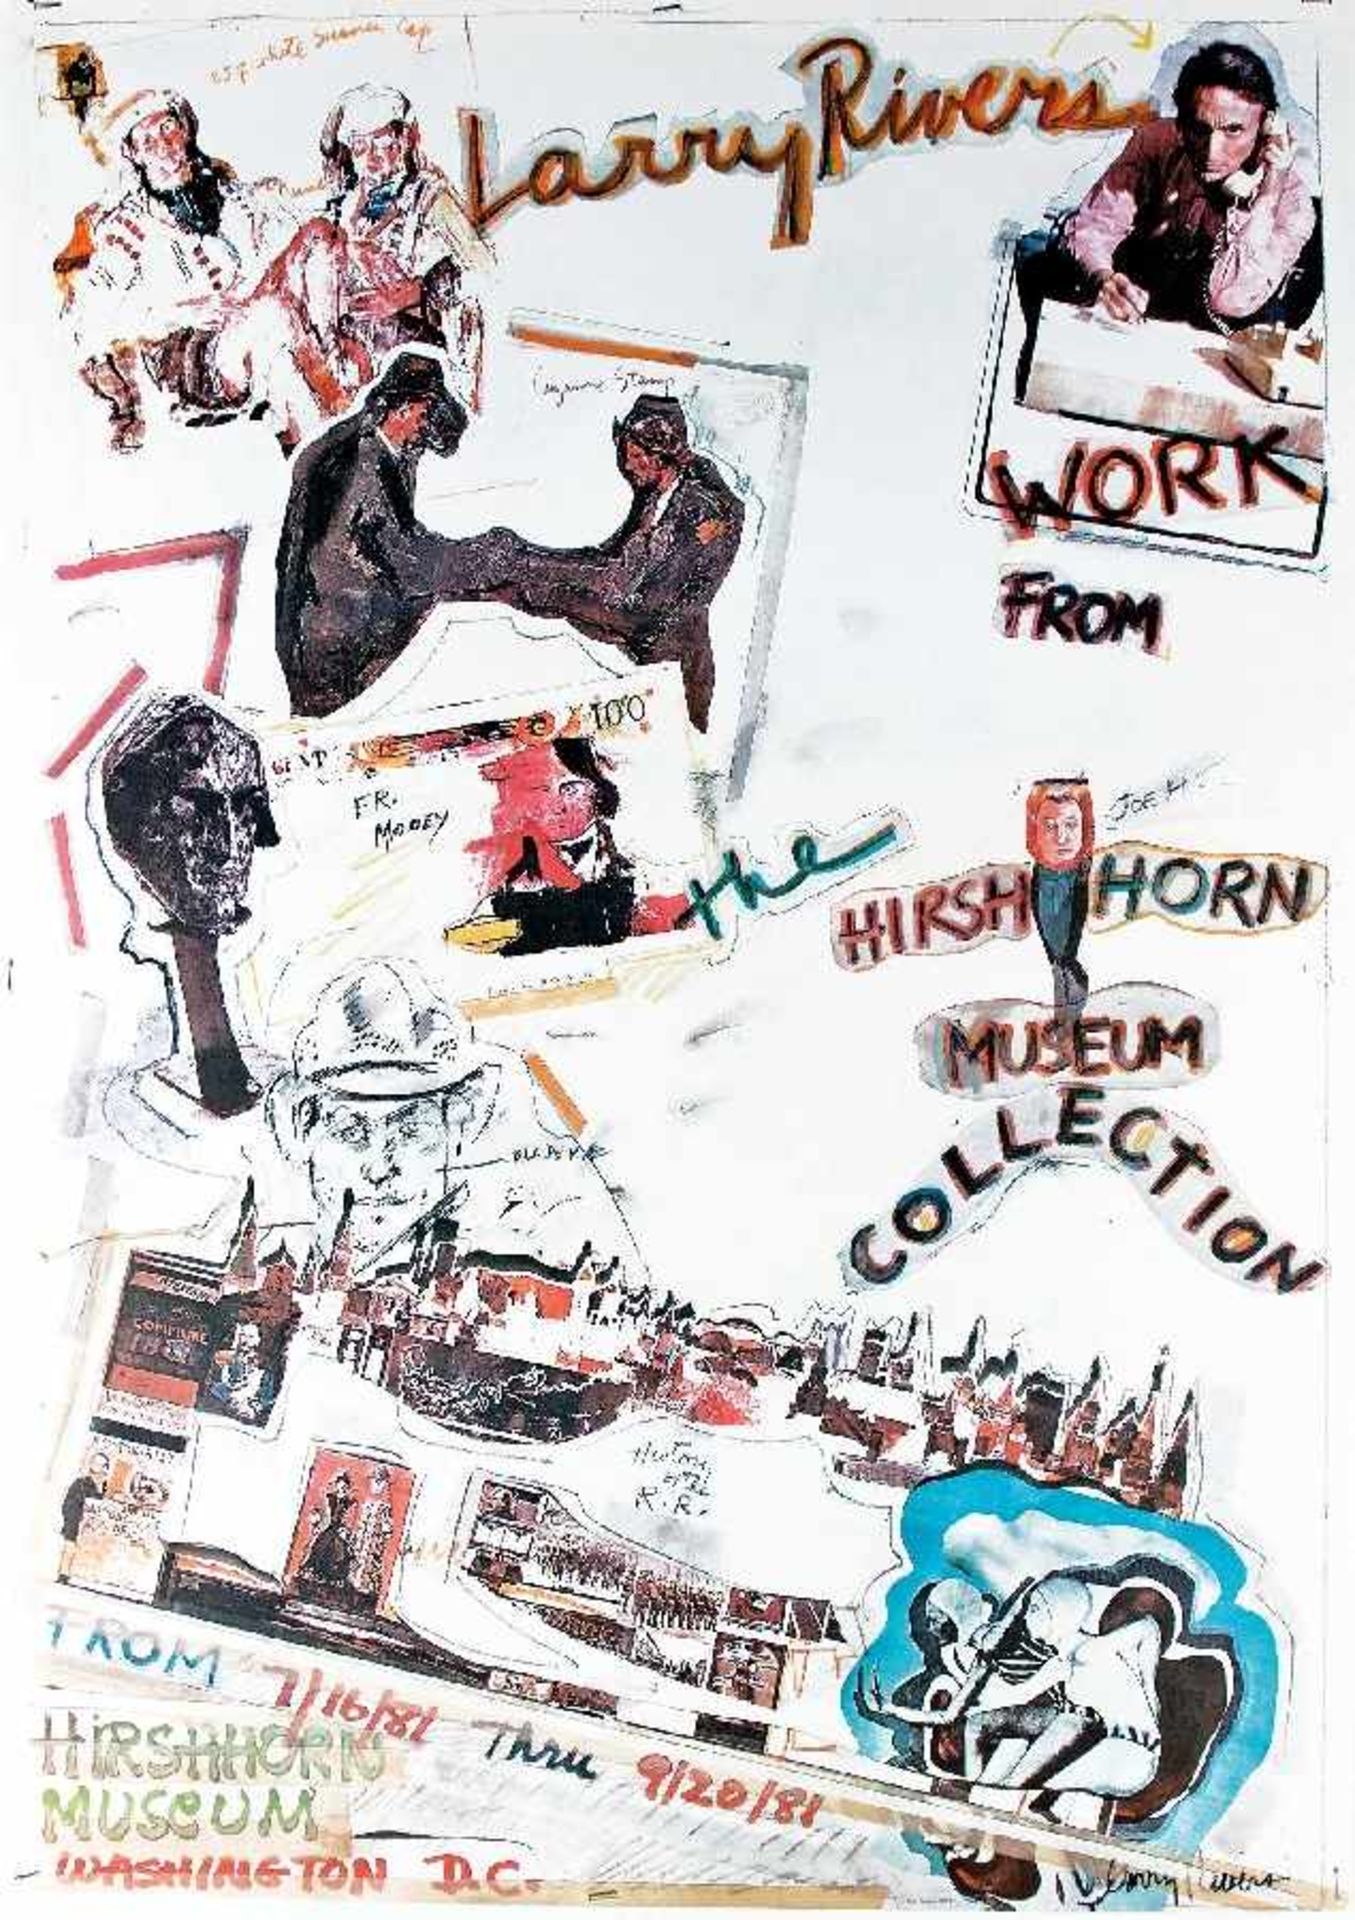 Larry Rivers 1923 New York - 2002 Southampton, Long Island Work from the Hirschhorn Museum